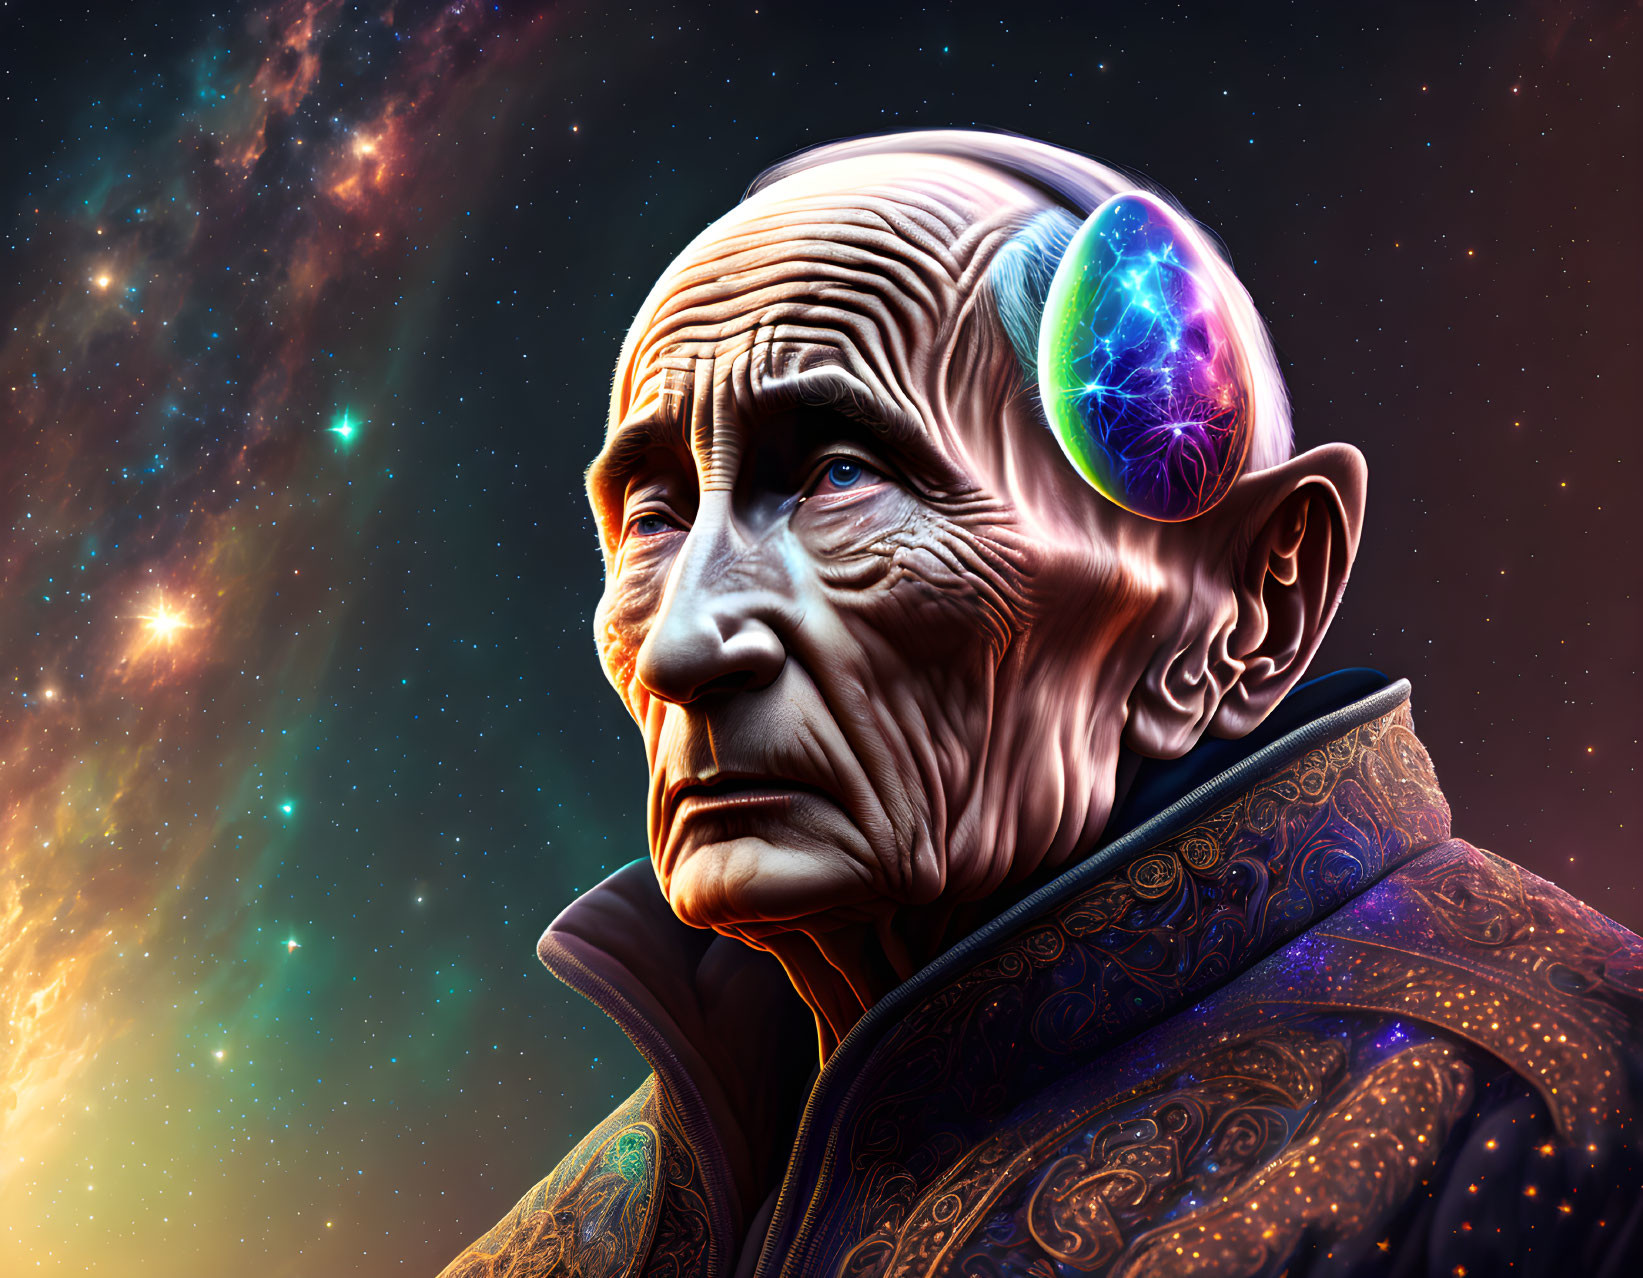 Elderly person with brain illustration in cosmic setting.